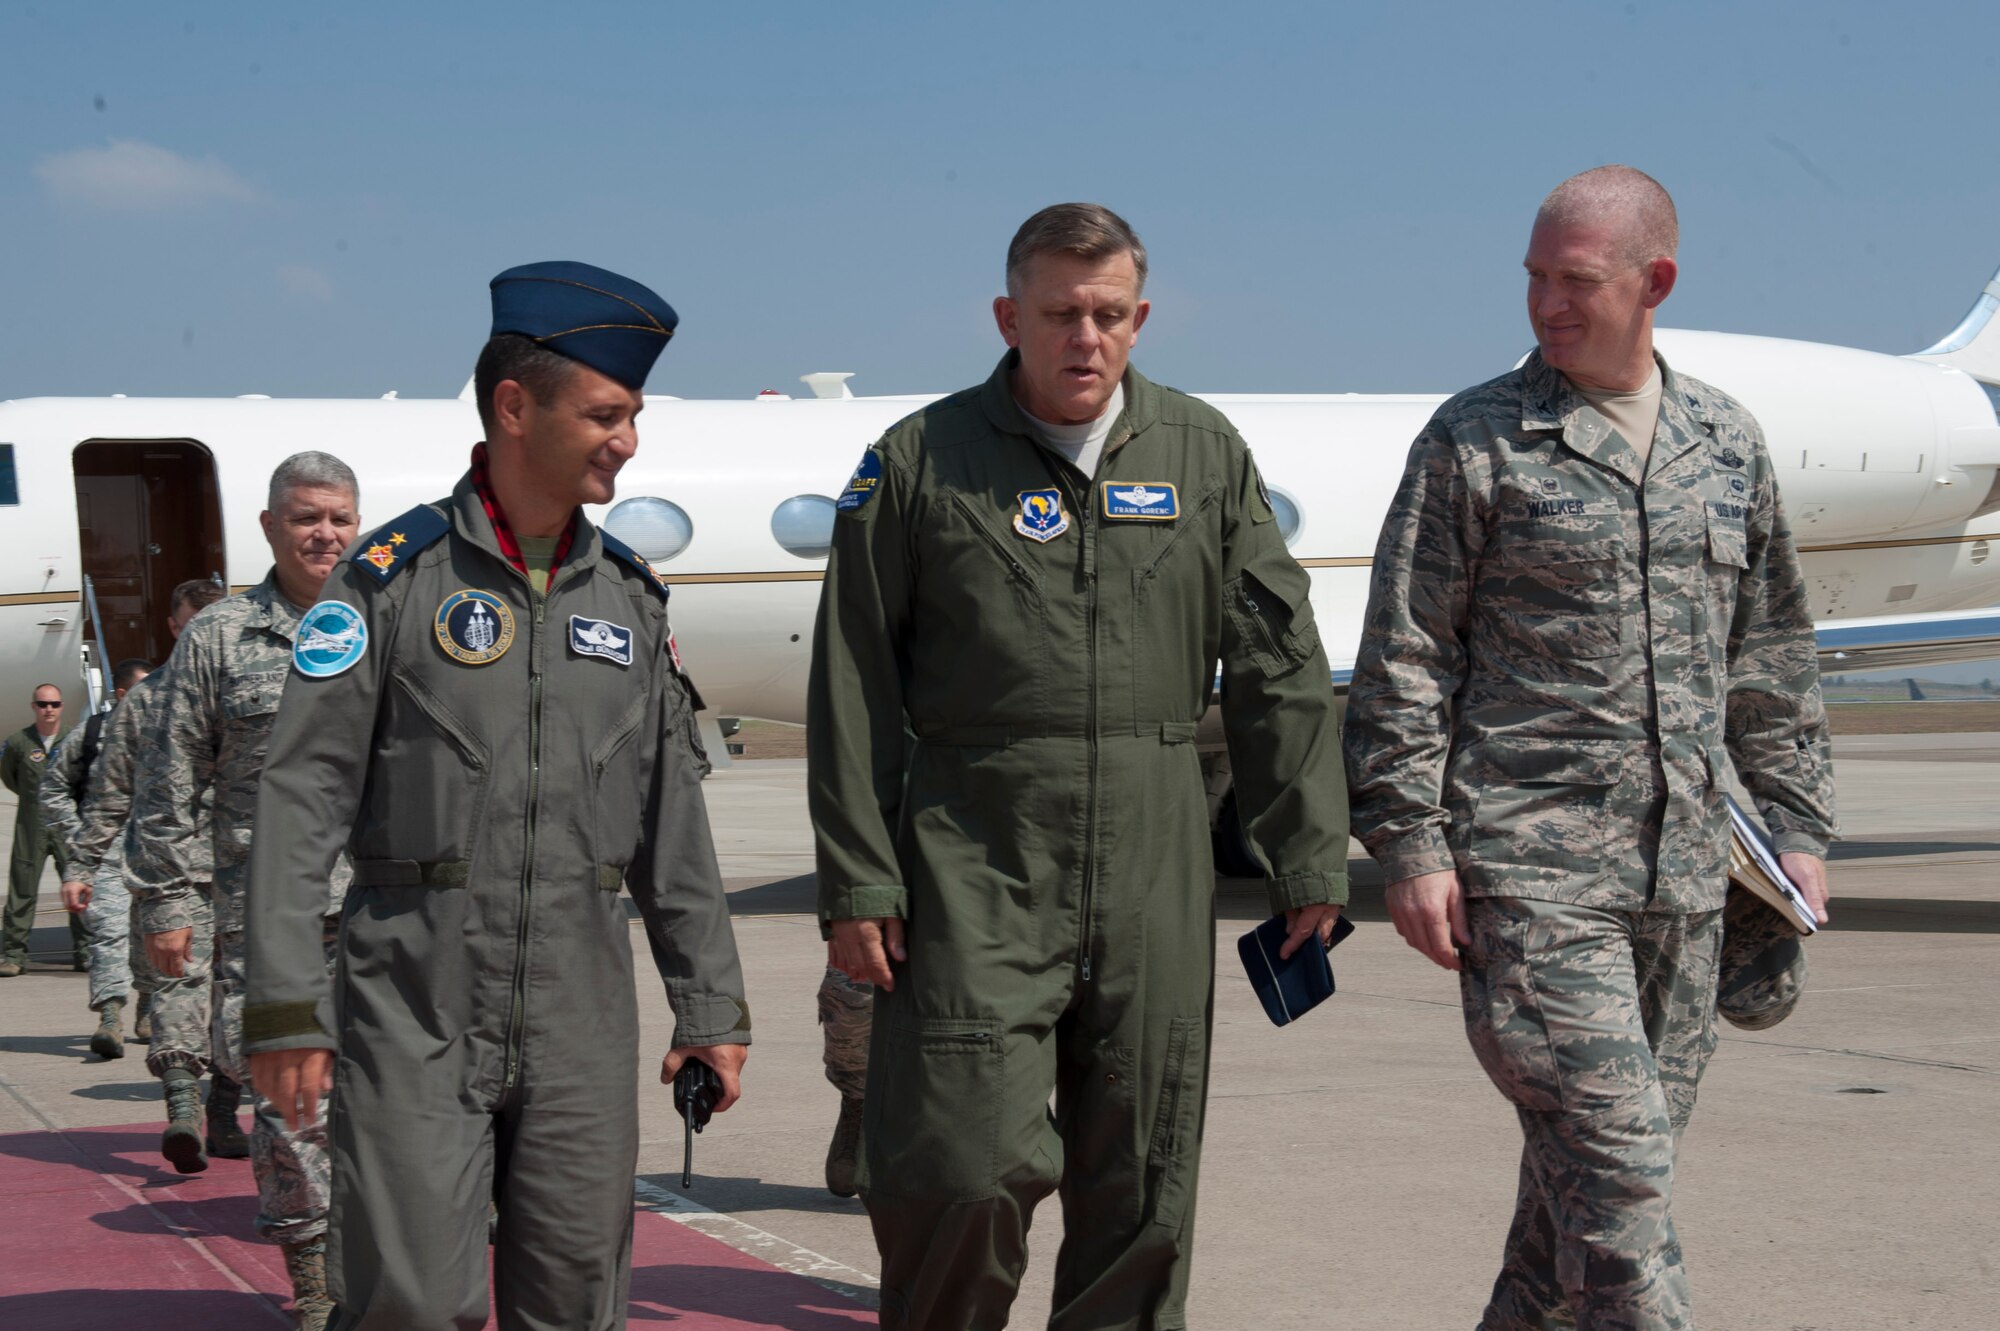 U.S. Air Force Gen. Frank Gorenc, commander, U.S. Air Forces in Europe, U.S. Air Forces Africa, and Allied Air Command, is greeted by Col. John Walker (right) and Turkish Air Force Brig. Gen. Ismail Günaydin, 10th Tanker Command commander, Aug. 3, 2016, at Incirlik Air Base, Turkey. Gorenc visited Airmen to thank them for their hard work and dedication during his time as USAFE-AFAFRICA commander. During the visit Gorenc also met with NATO Turkish partners. (U.S. Air Force photo by Airman 1st Class Devin M. Rumbaugh)